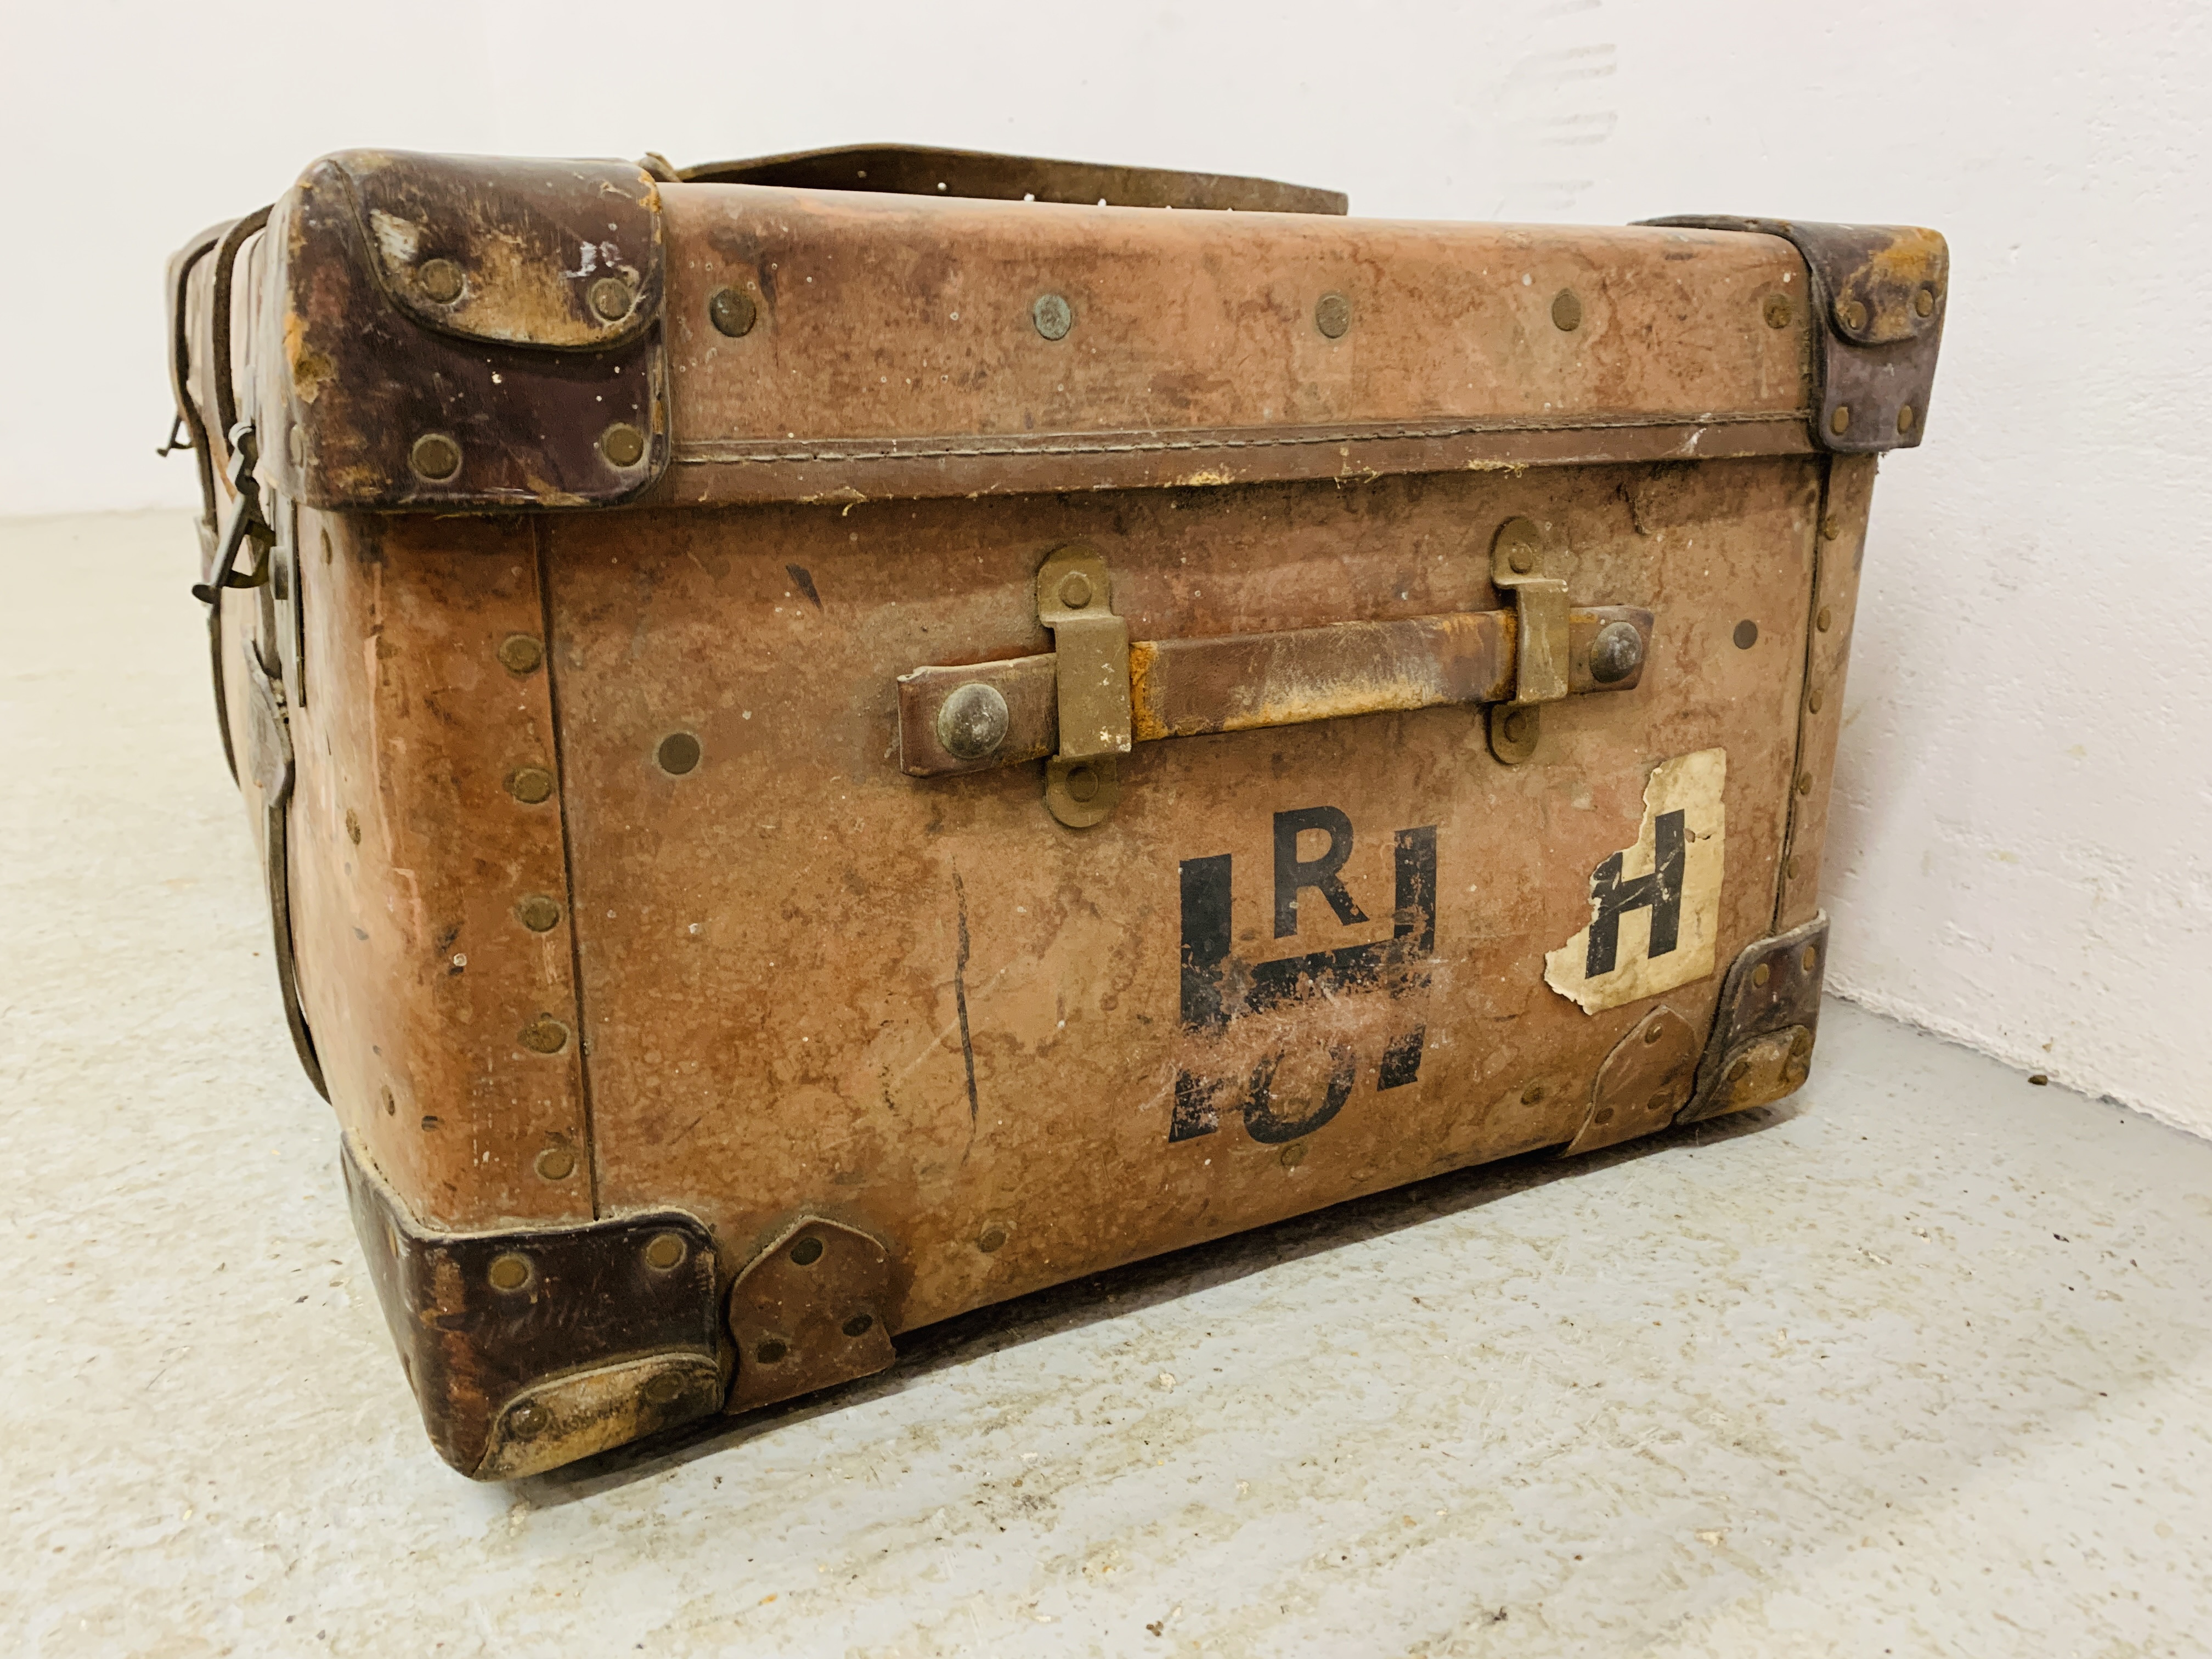 VINTAGE CAVE & SONS "OSILITE" LEATHER BOUND TRAVEL TRUNK - W 87CM, D 51CM, - Image 3 of 10